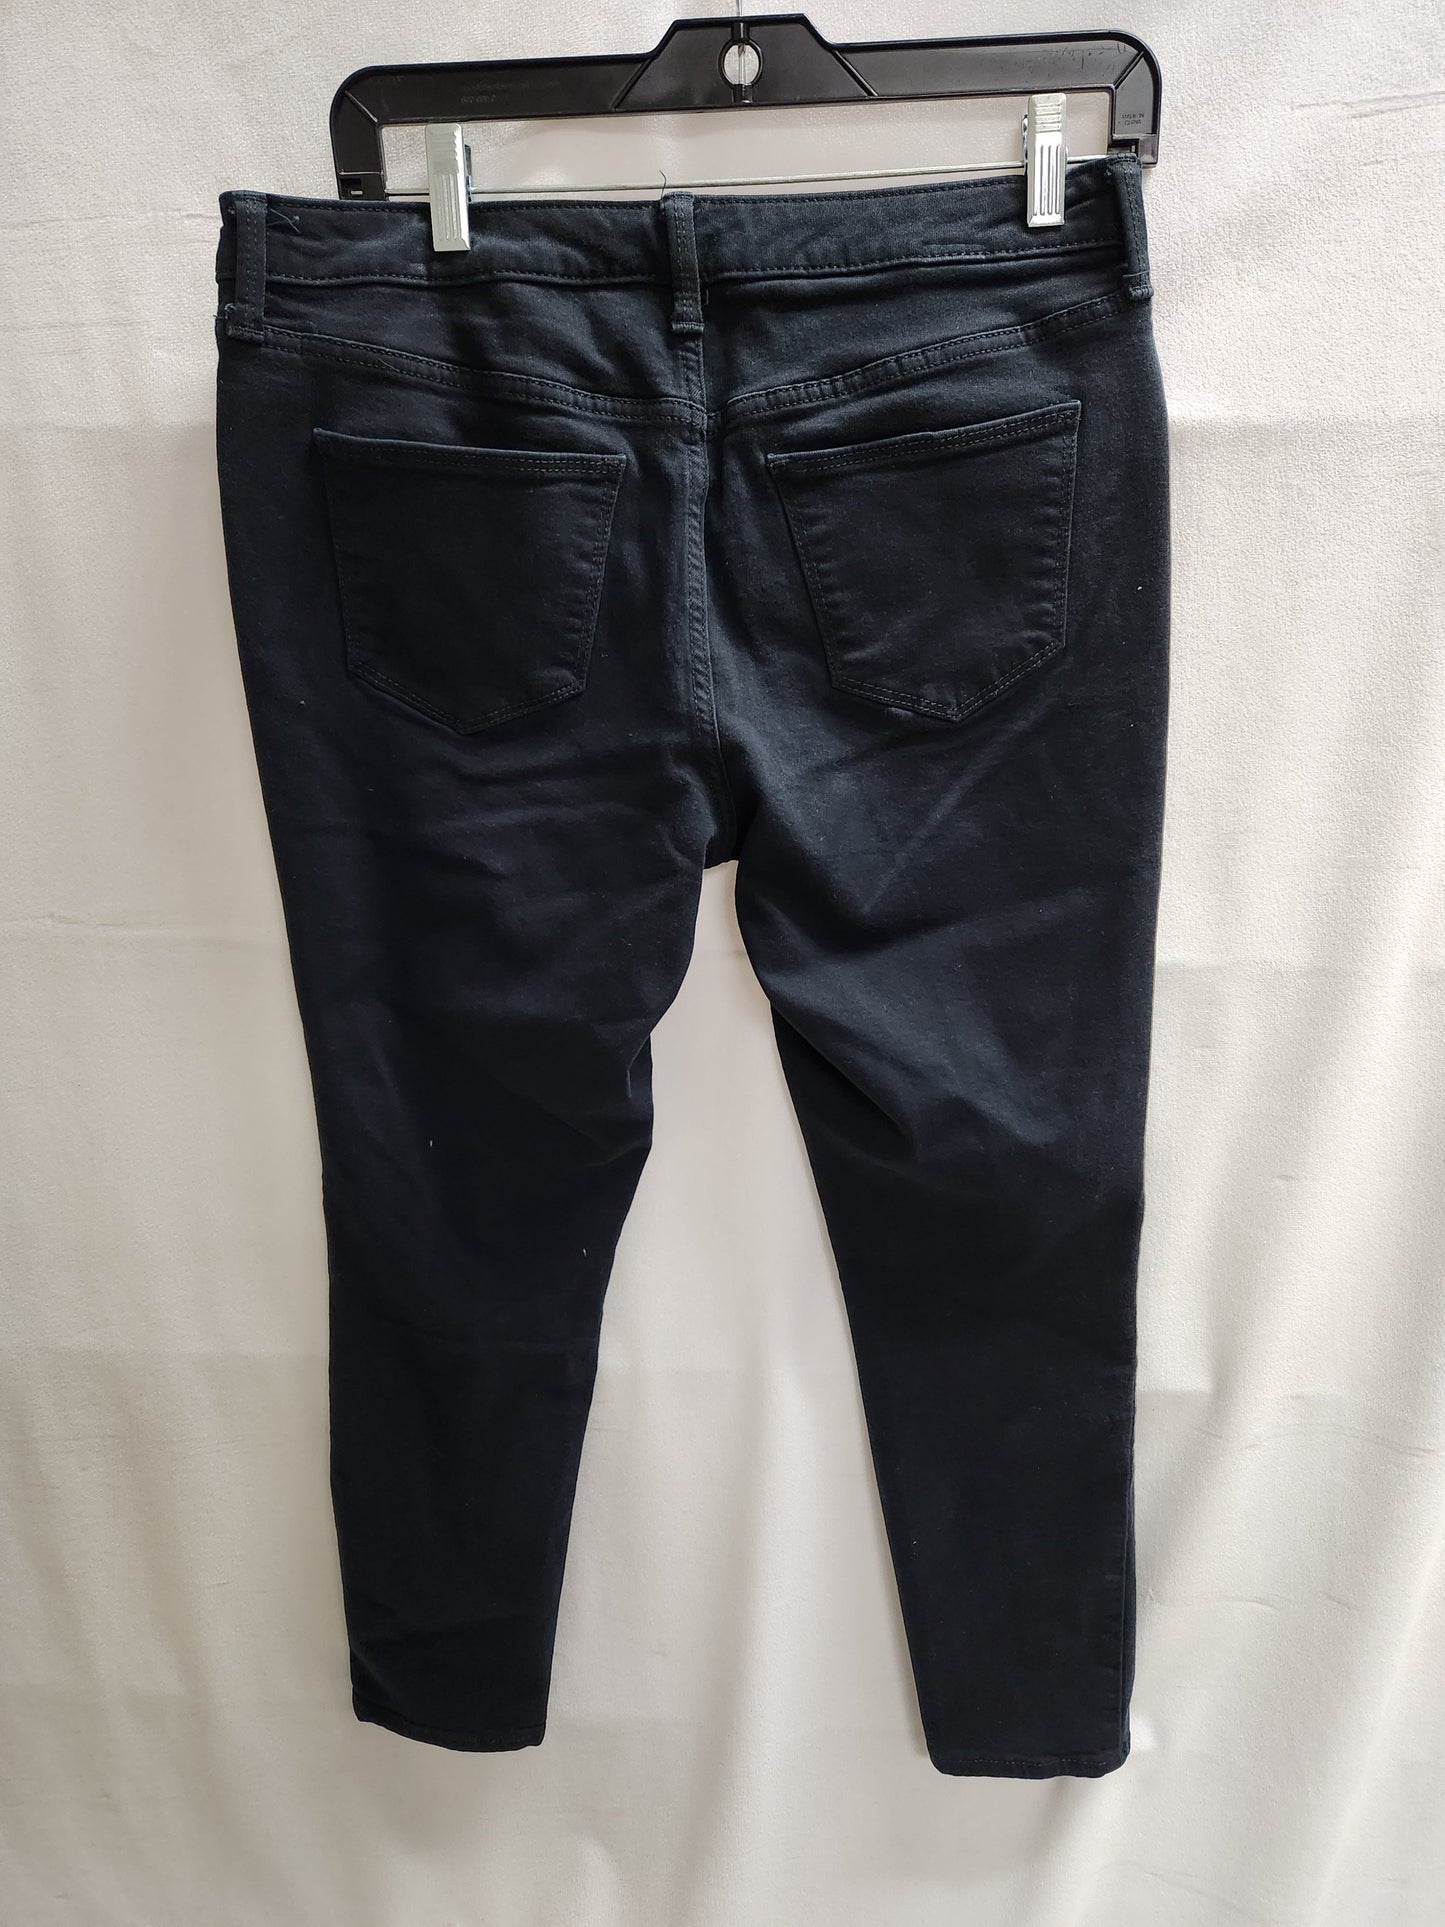 Jeans Skinny By Universal Thread  Size: 10